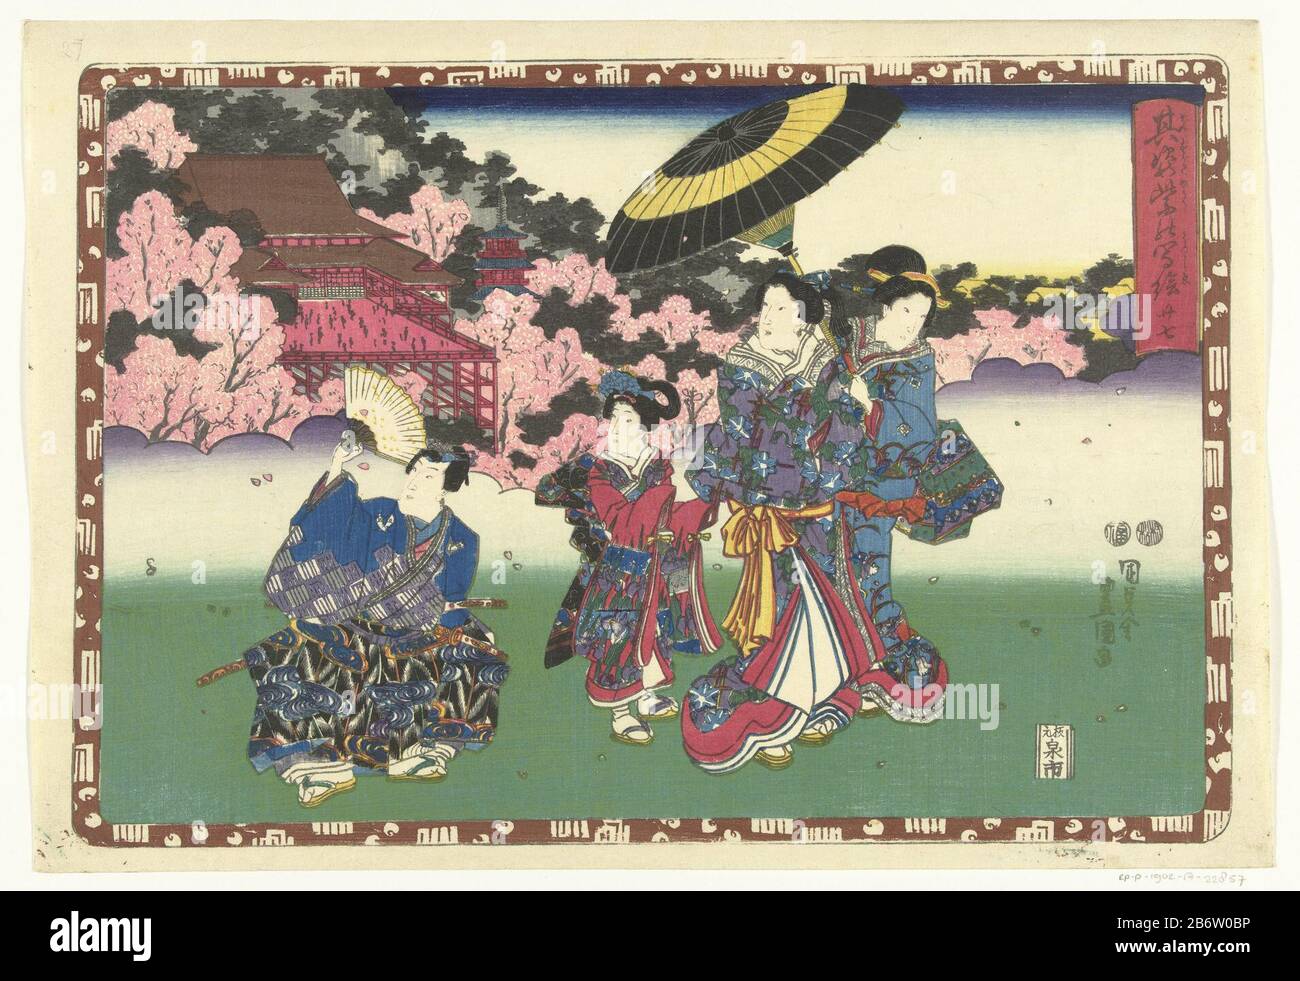 Hoofdstuk 27 Getrouwe afbeeldingen van de Schitterende Prins (serietitel) Sono sugata Hikaru no utsushi-e (serietitel op object) Woman under umbrella with honor and maid, looking at prince Genji sitting with fan; temple and pagoda among blossoming trees in the background. Presentation surrounded by brown edge Where: in Genji emblemen. Manufacturer : printmaker: Kunisada (I), Utagawa (listed building) censor: Fukushima Giemon (listed building) censor: Muramatsu Genroku (listed building) publisher: Izumiya Ichibei (Chance Endo ) (listed building) Place manufacture: printmaker Japan Censor: Censo Stock Photo